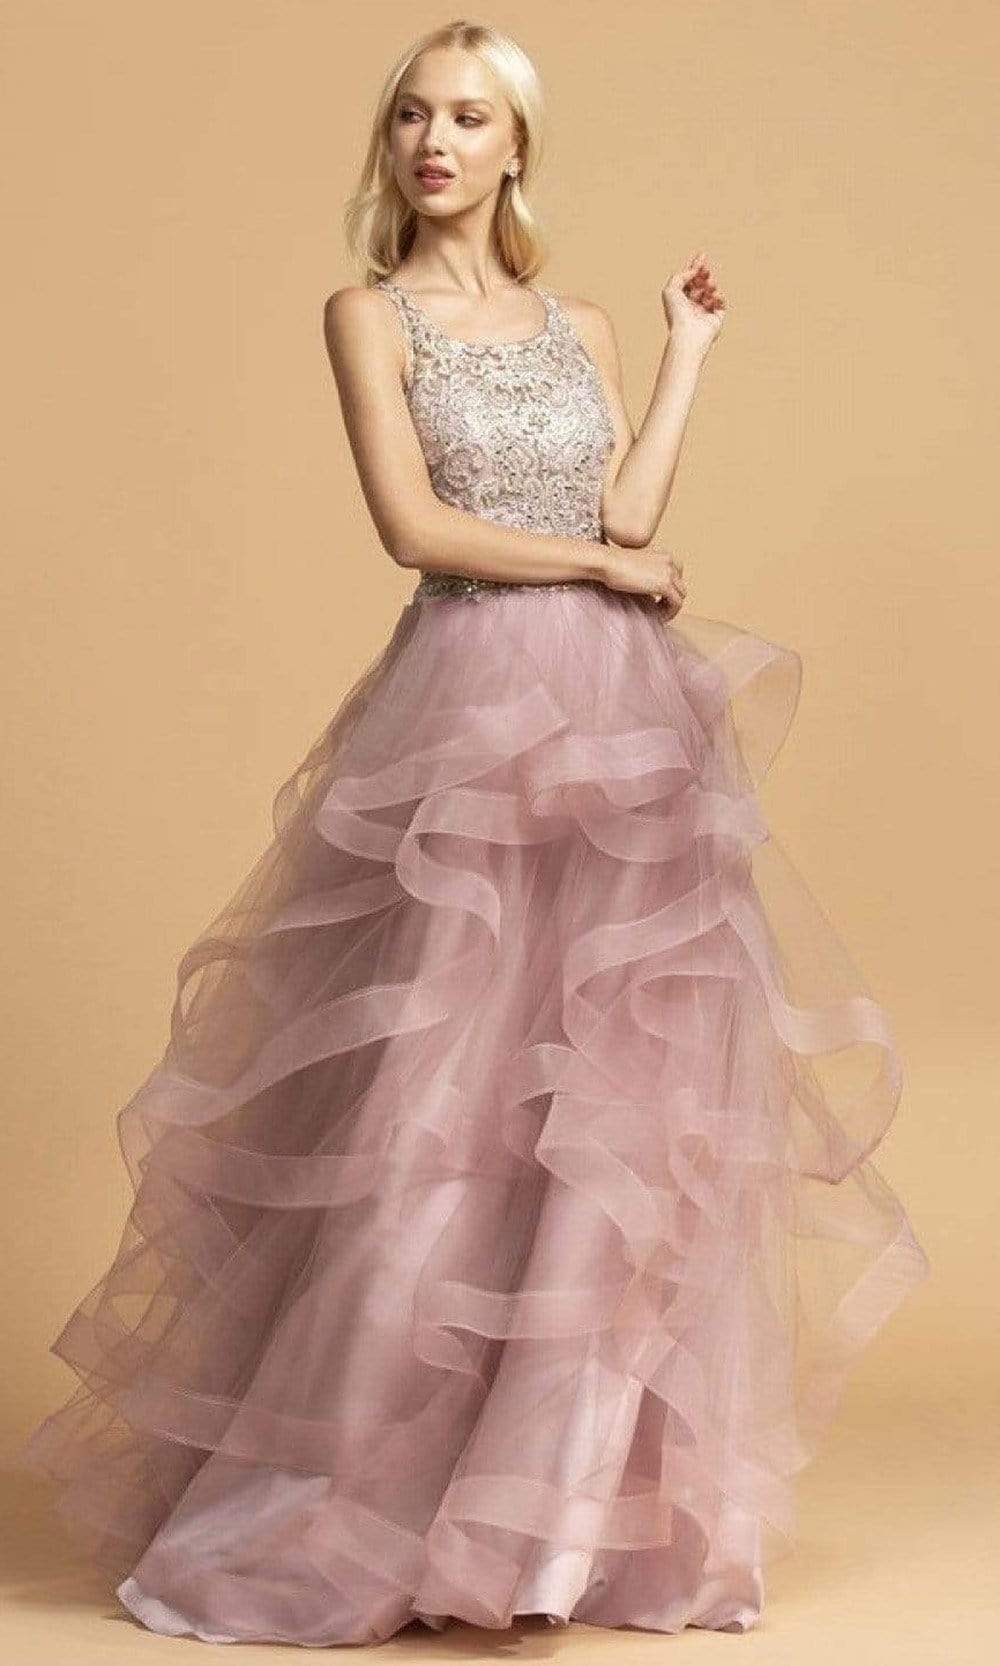 Image of Aspeed Design - L2160 Lace Bodice Tiered Tulle Dress